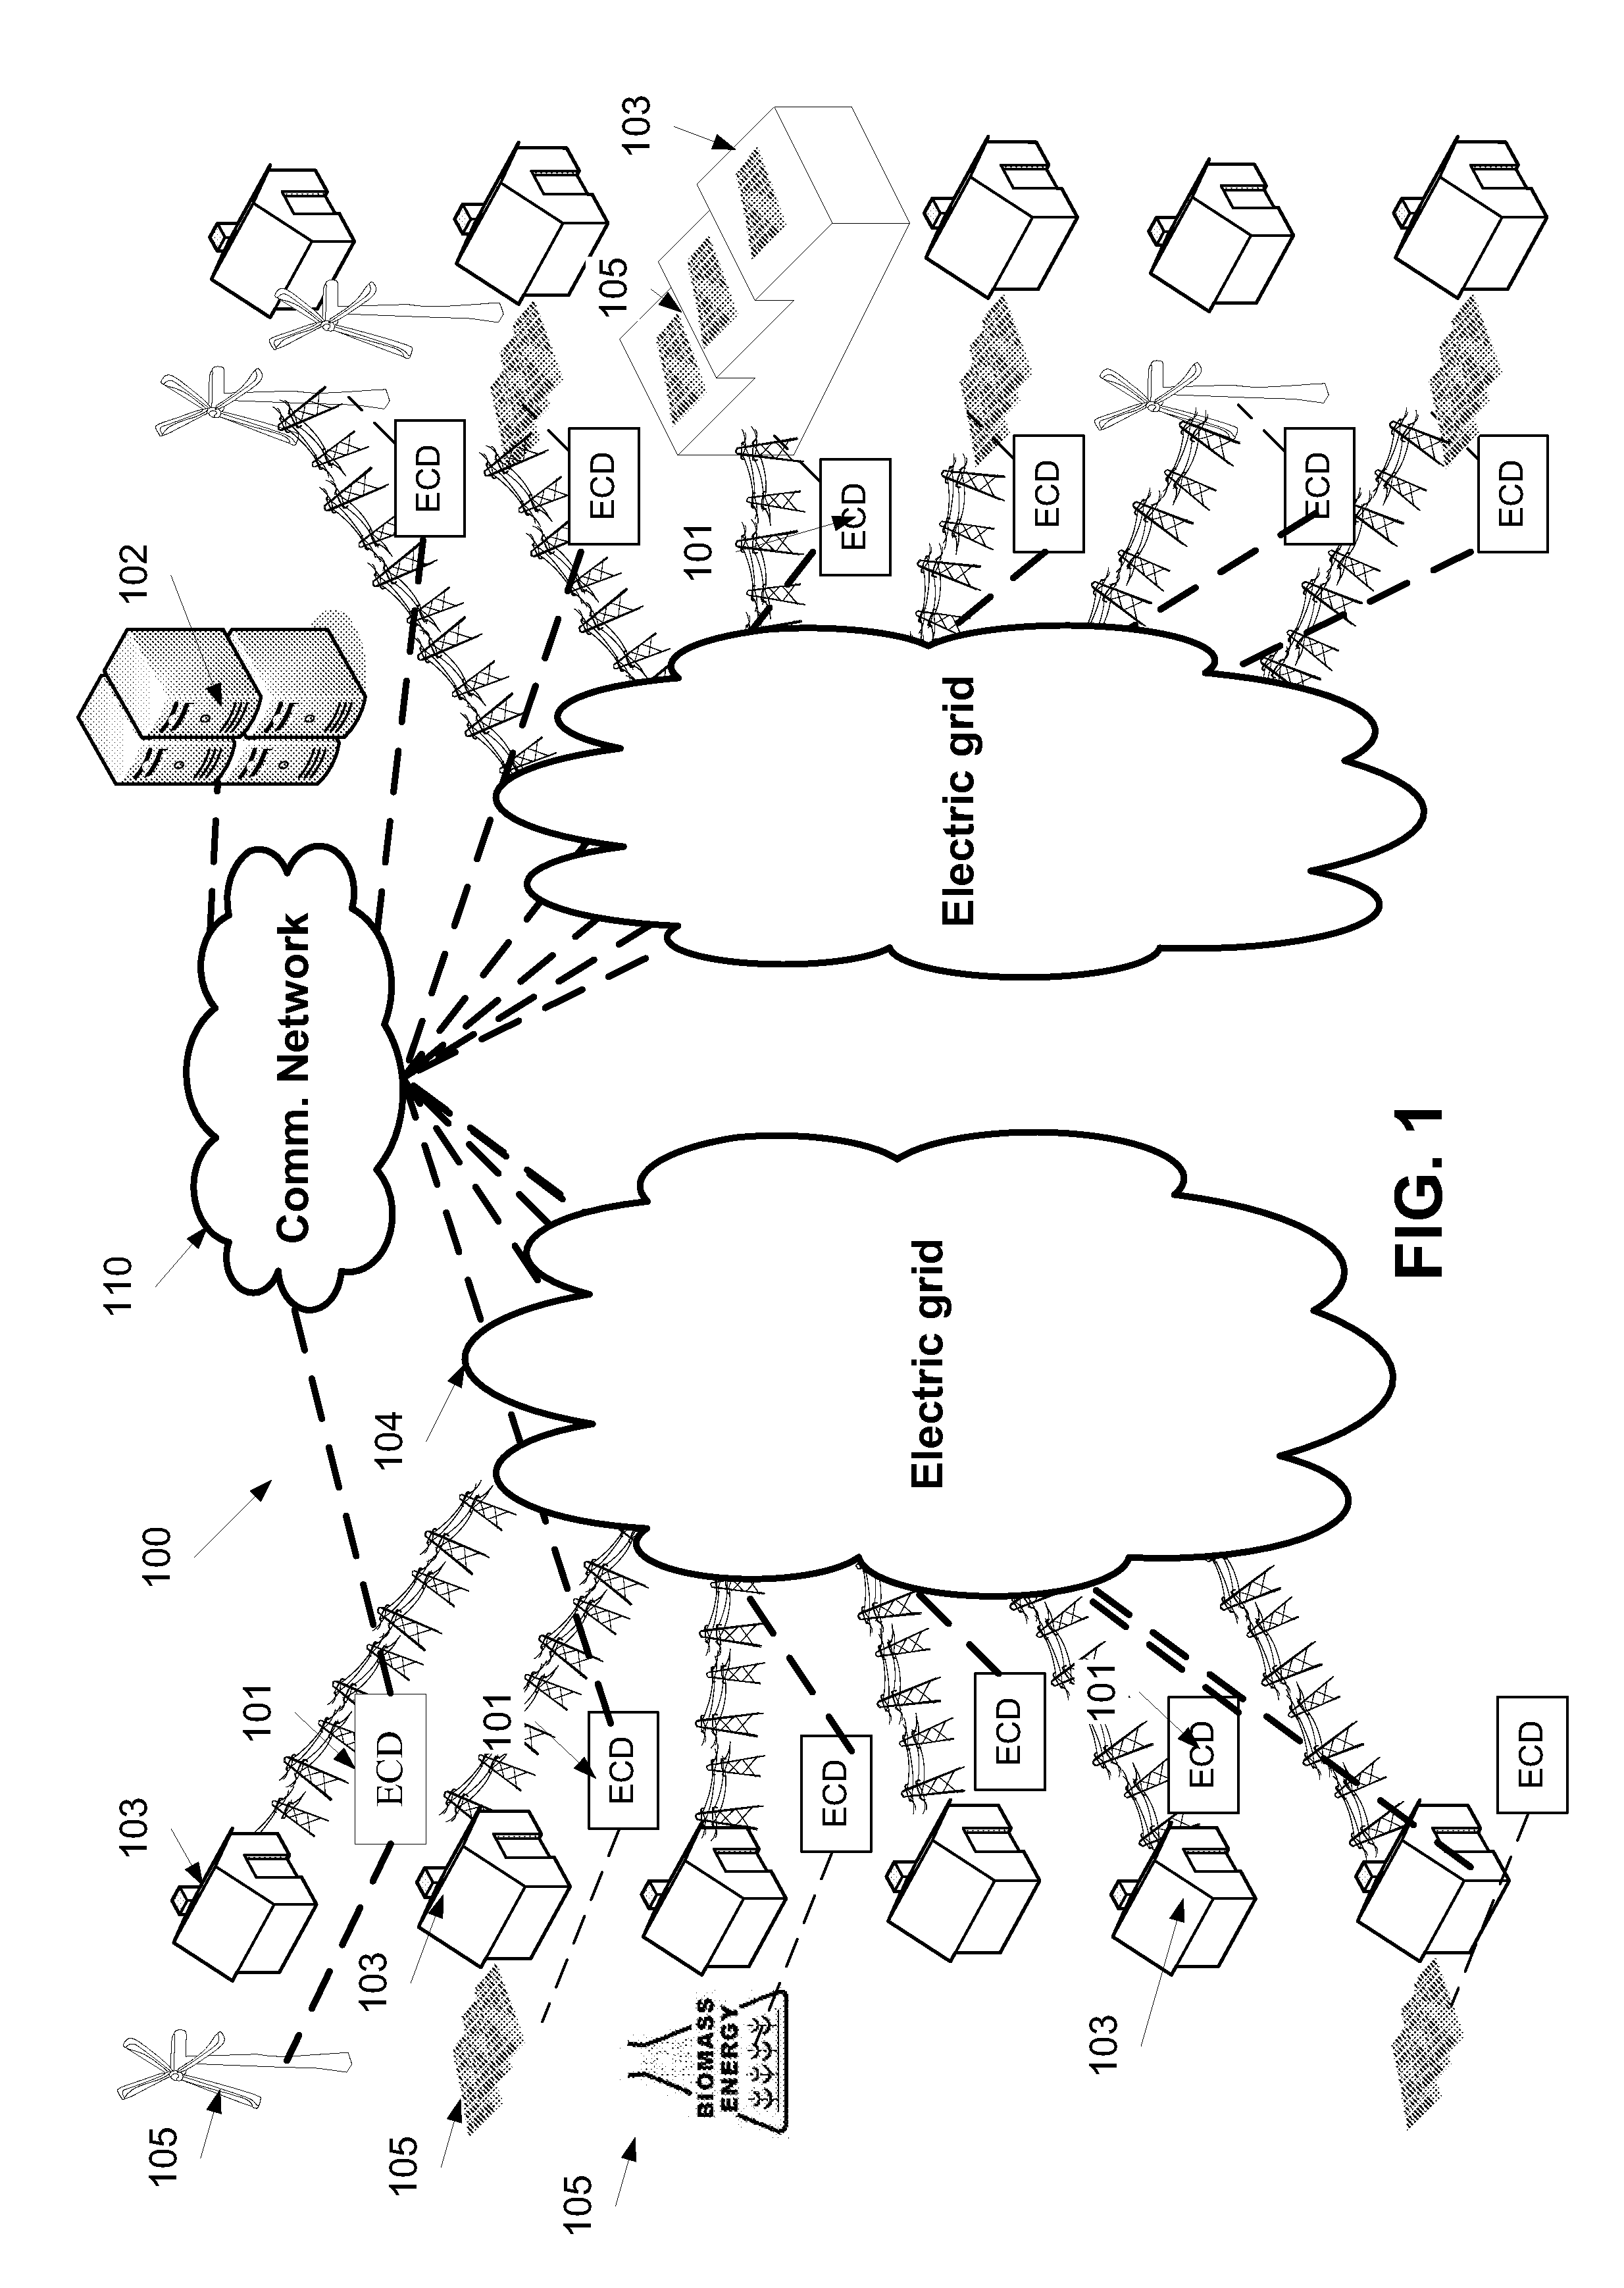 Methods and systems for managing electricity delivery and commerce